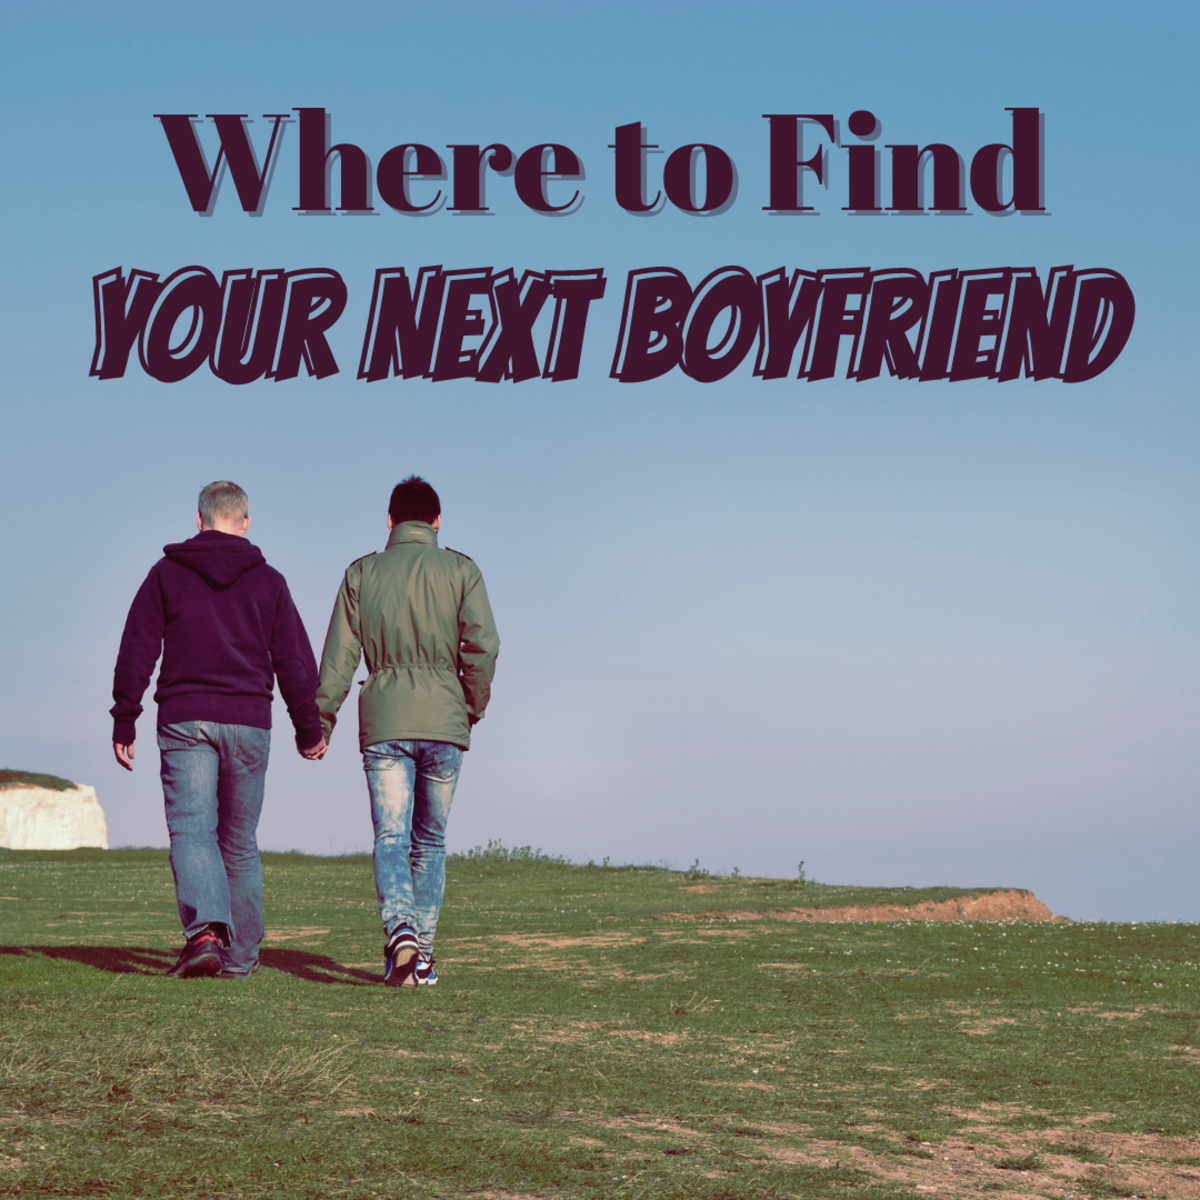 Gay Men: 7 Places to Find Your Next Boyfriend That Are Not a Bar